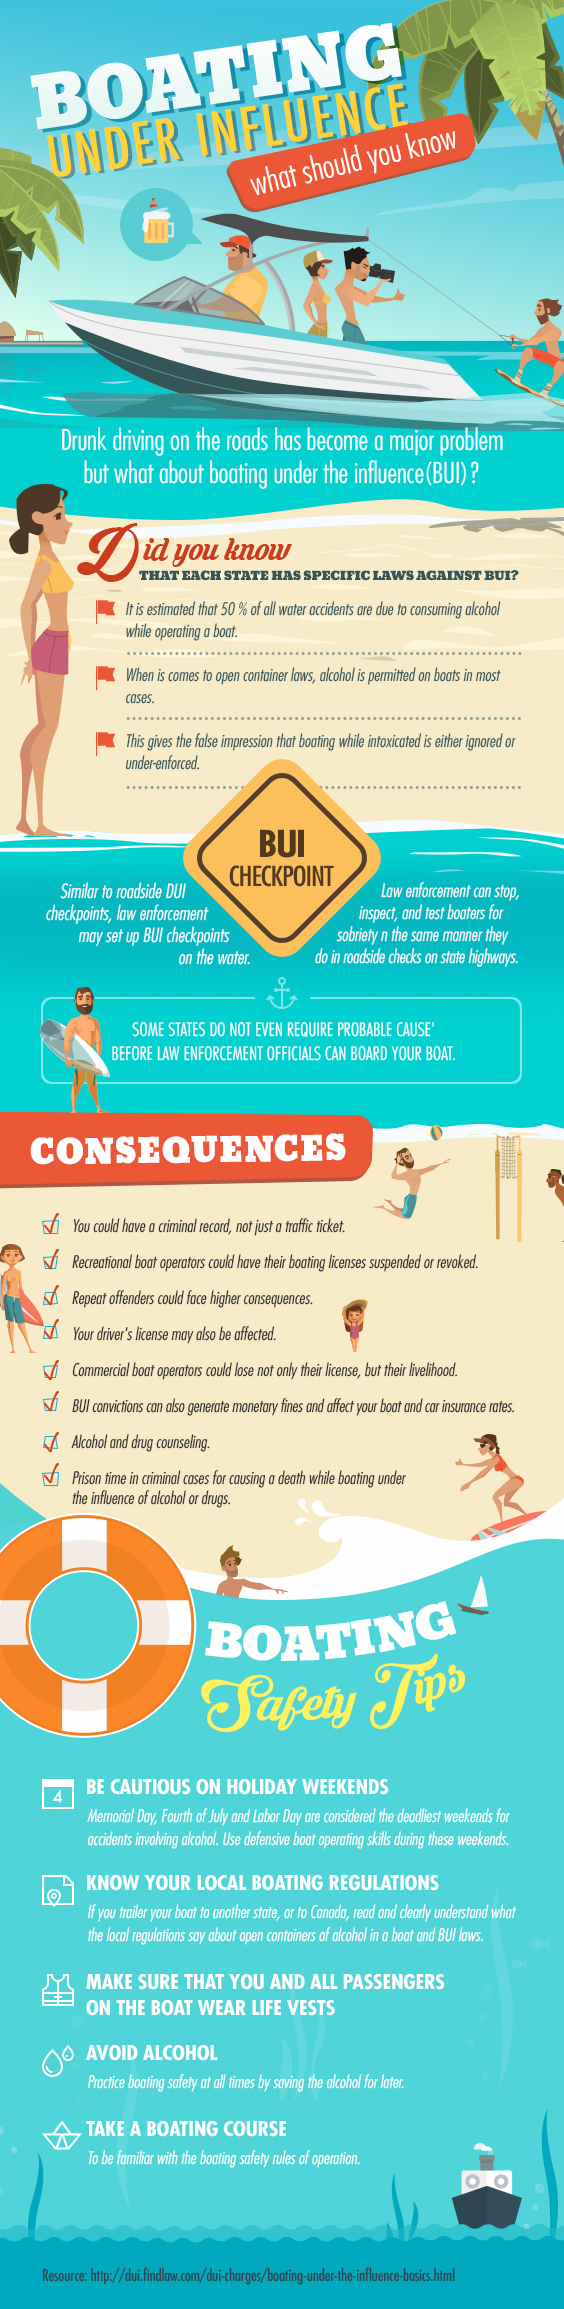 boating while drinking infographic - Orange County Attorneys